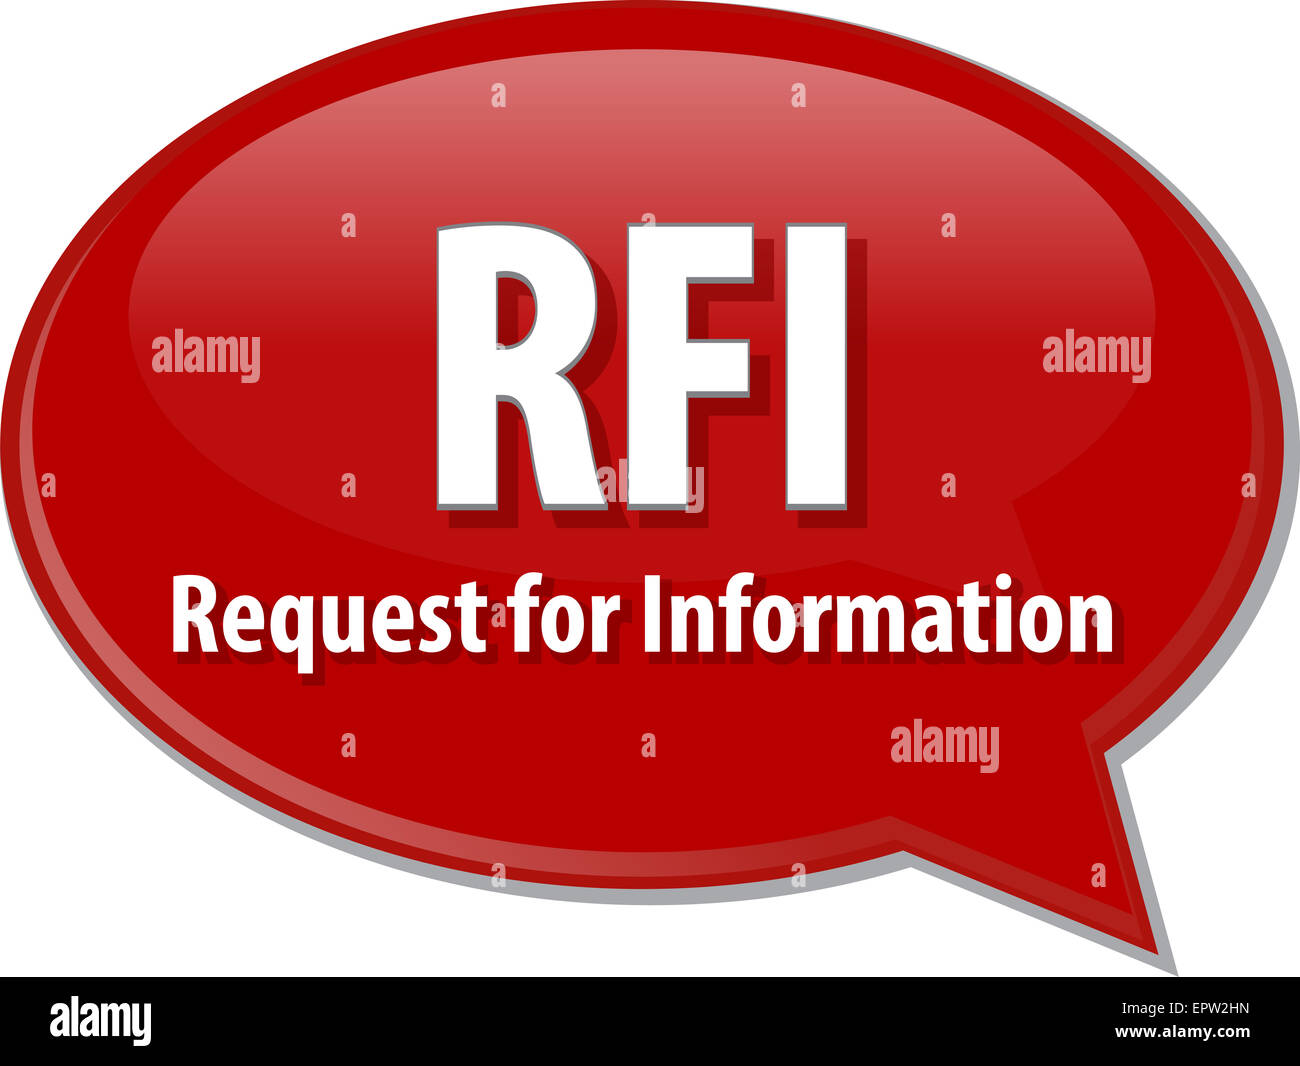 word speech bubble illustration of business acronym term RFI Request For  Information Stock Photo - Alamy